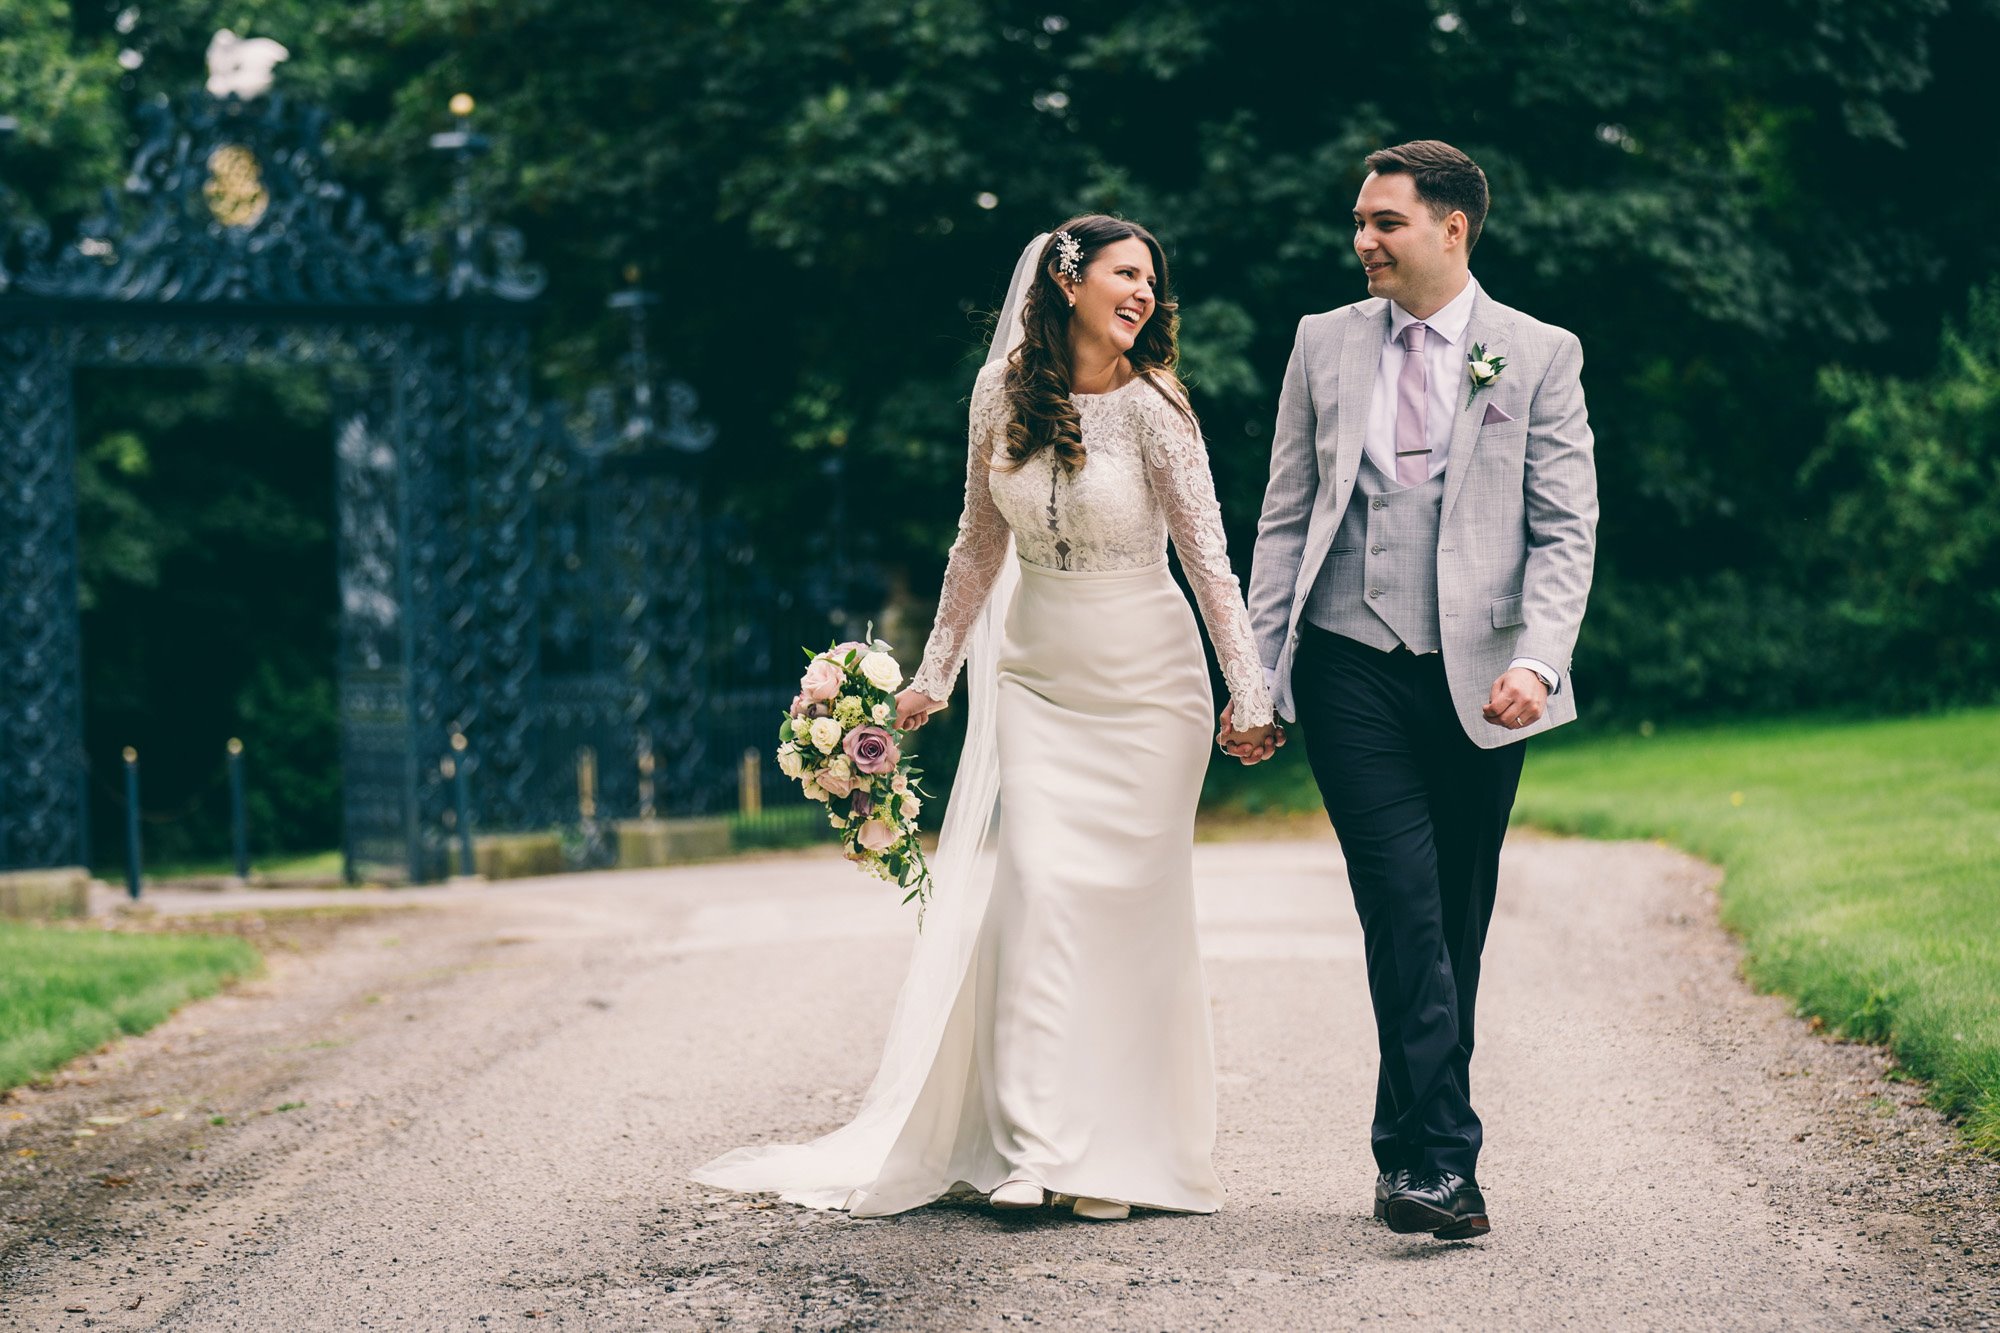 bride in pearl hair clip and lace dress holds hands with groom in grey suit walking up path to stately home wedding venue with wrought iron gates behind them